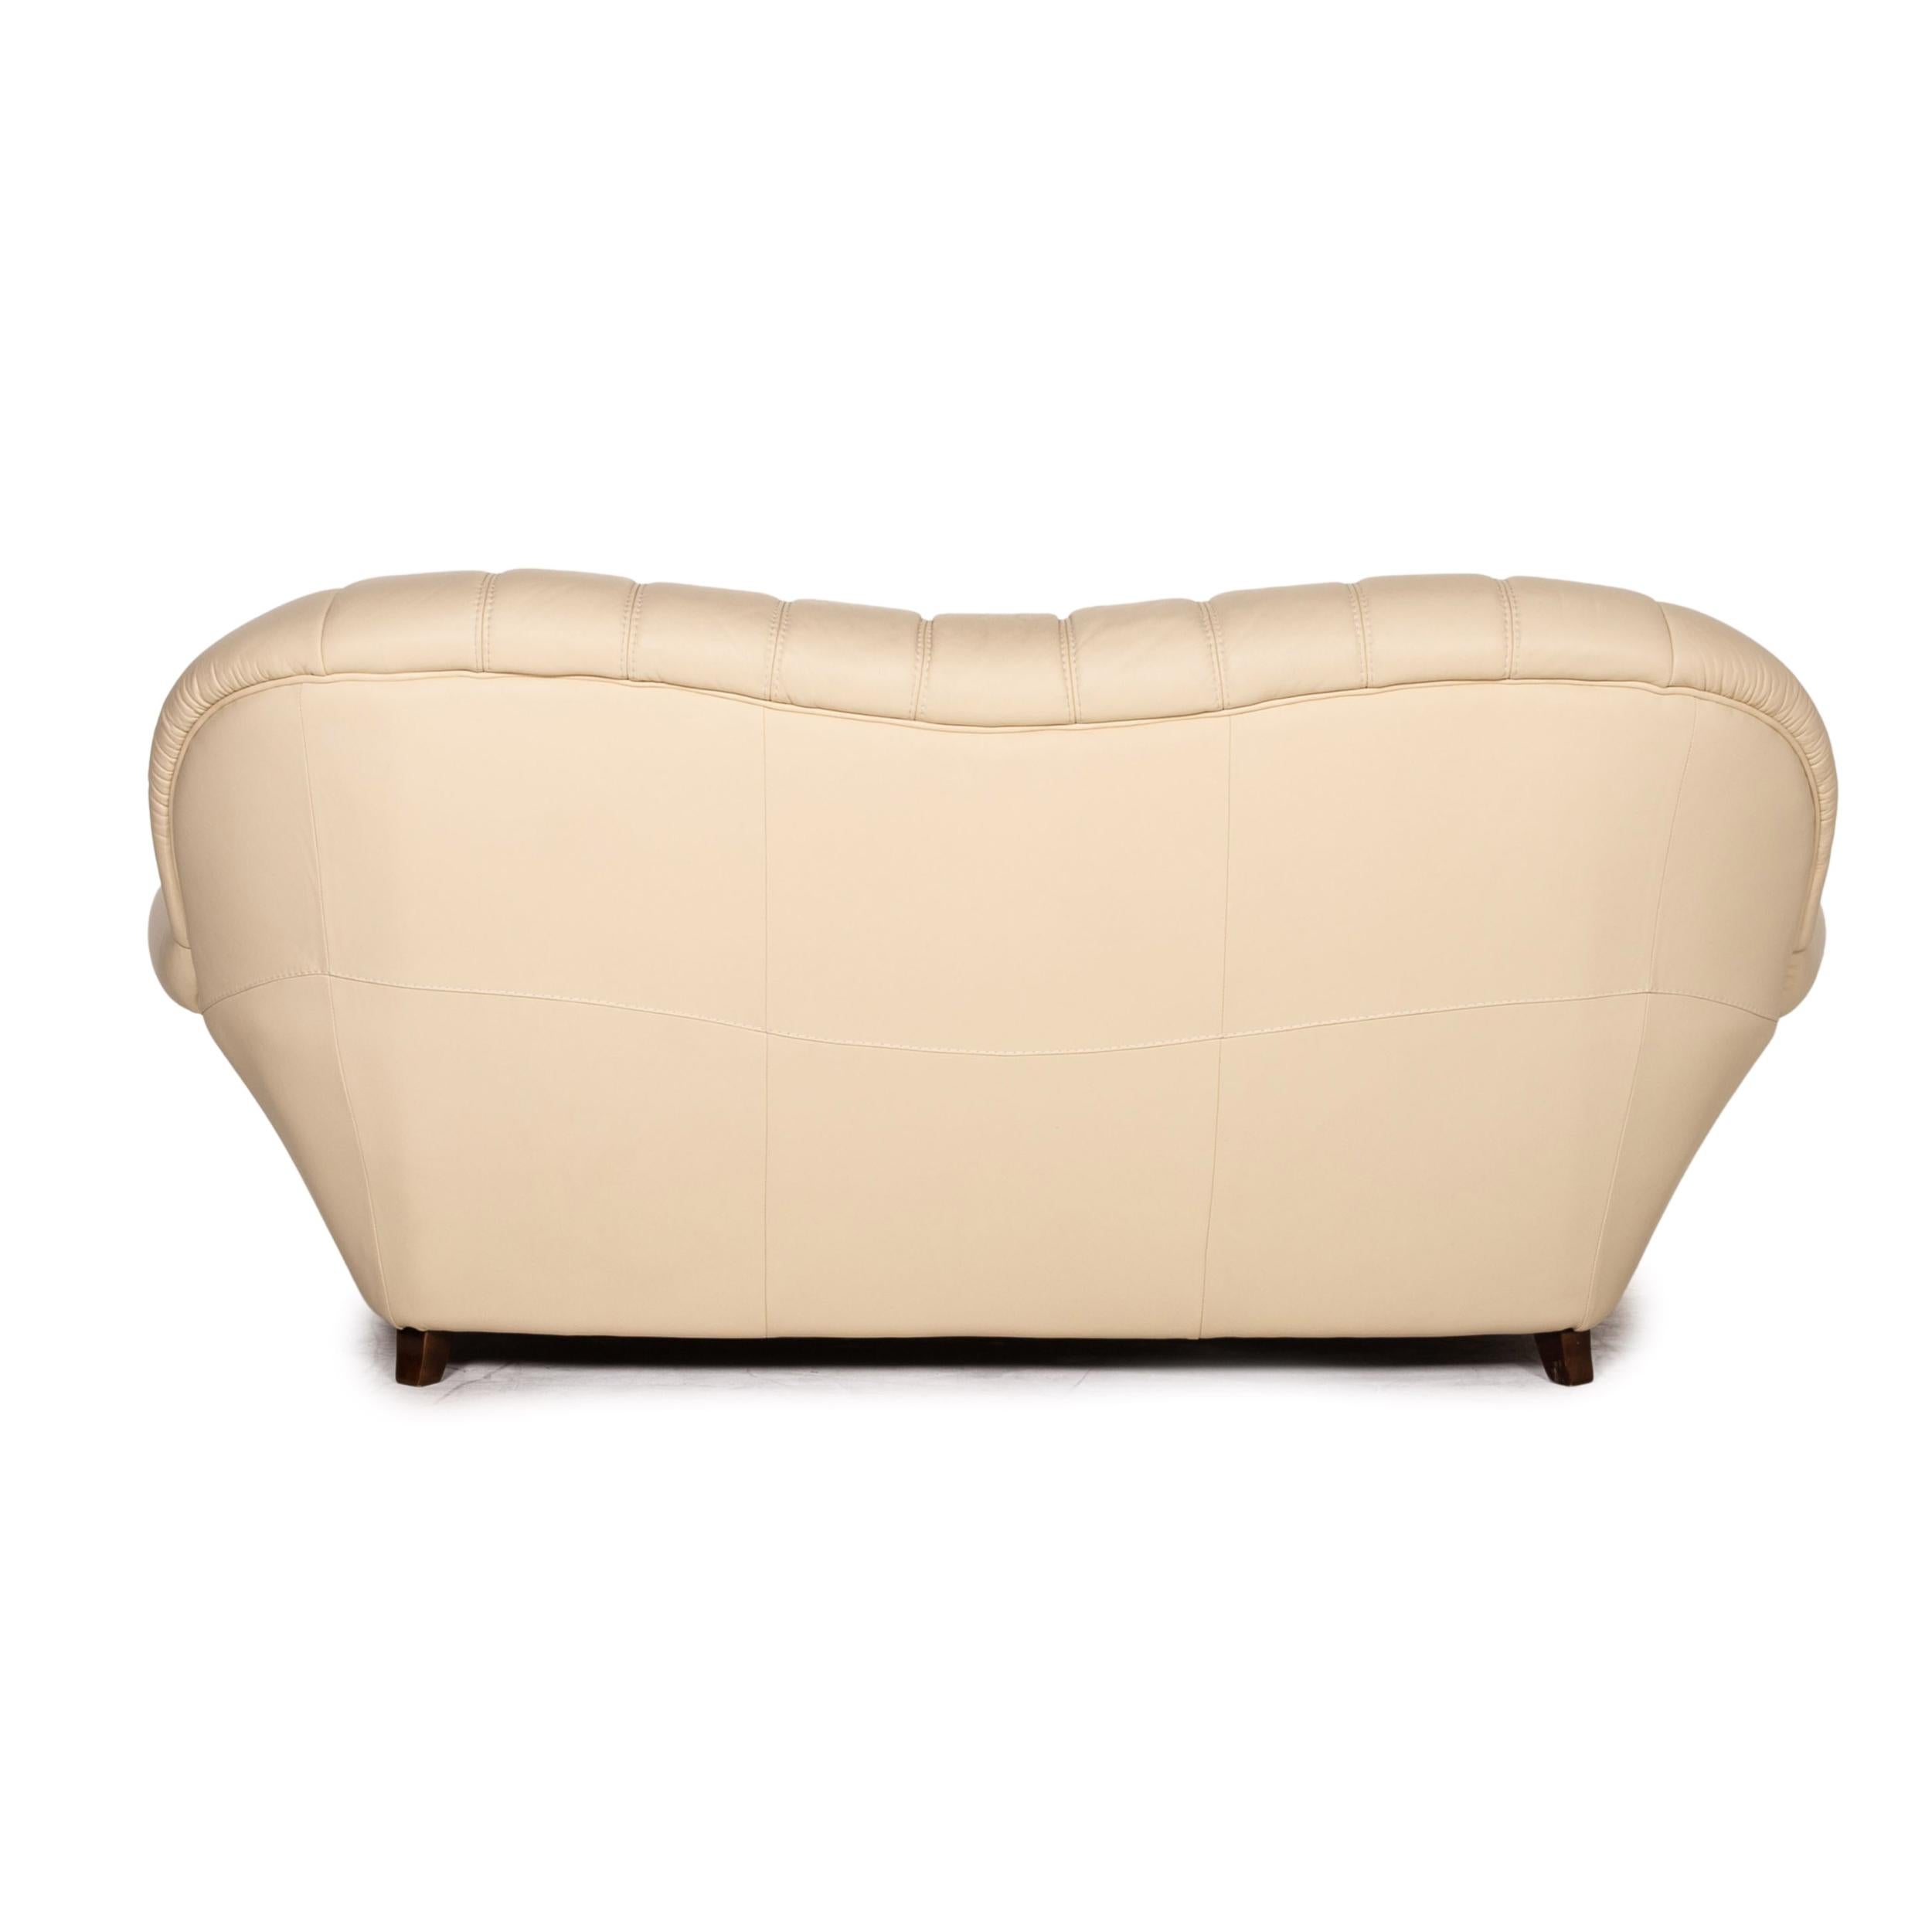 Nieri Leather Wood Sofa Cream Three-Seater Couch For Sale 2